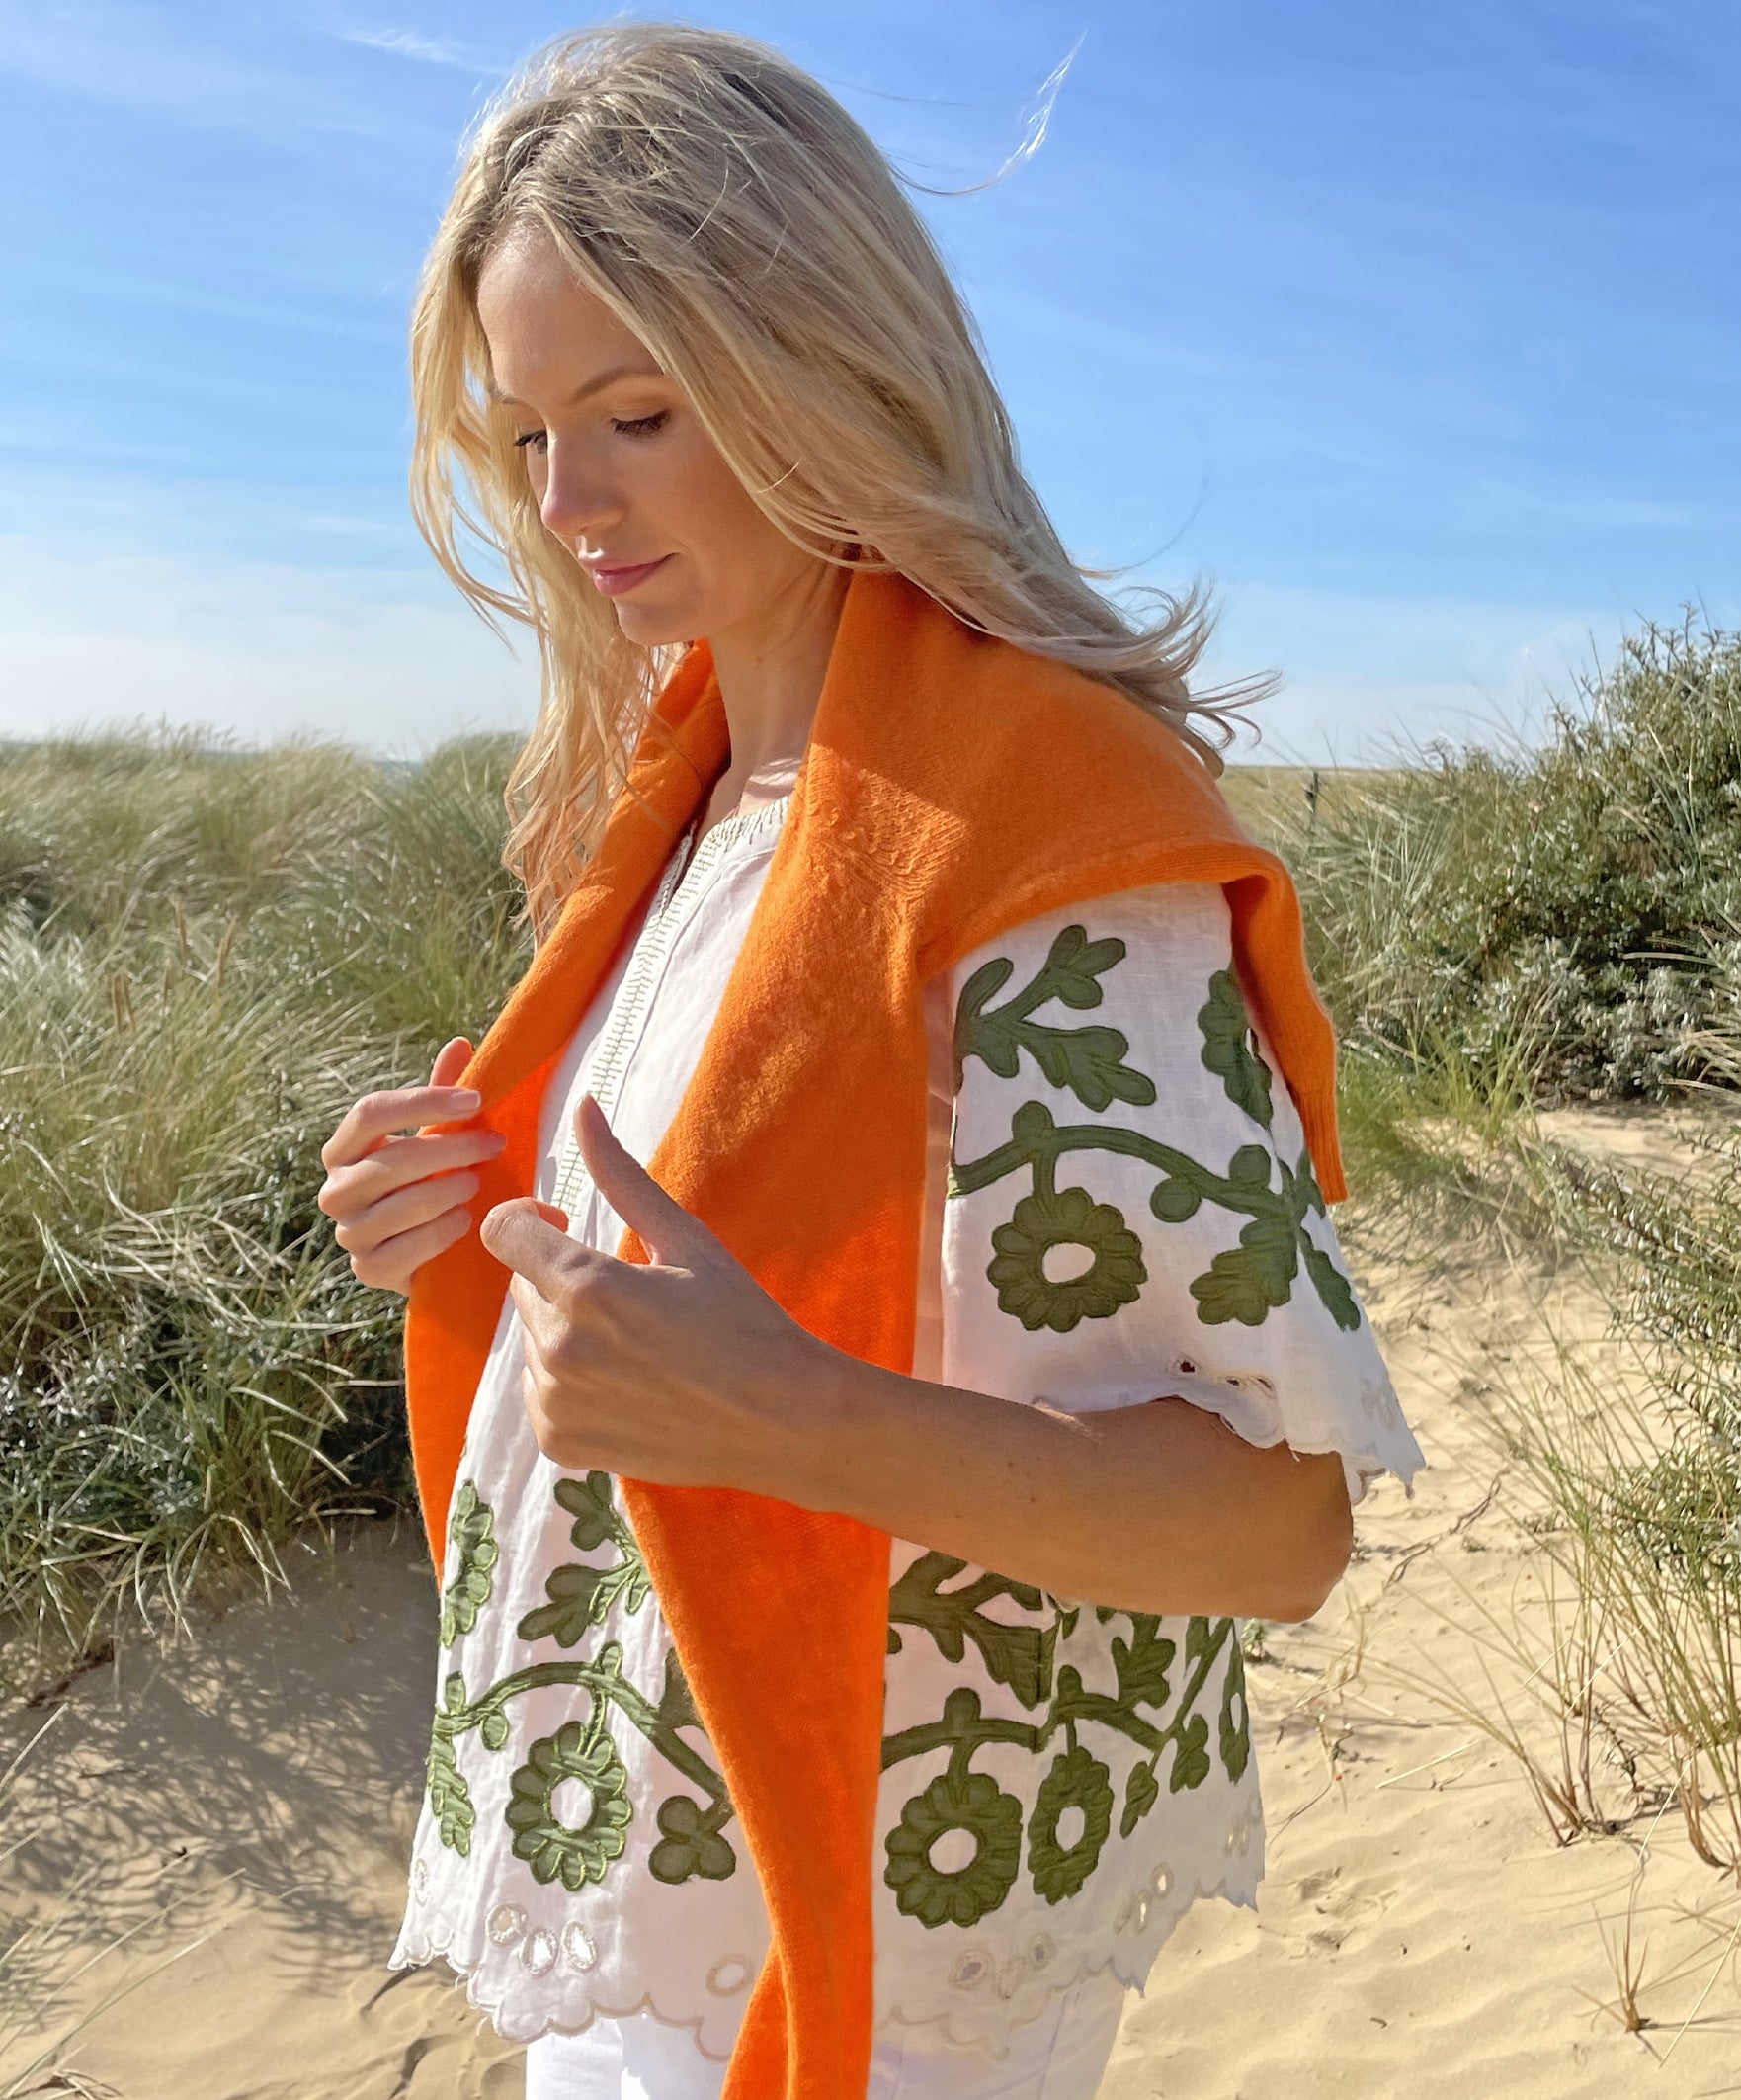 A model on a beach wearing the Rose and Rose Alessio top in white linen with olive applique and a Jumper 1234 jumper over her shoulders.